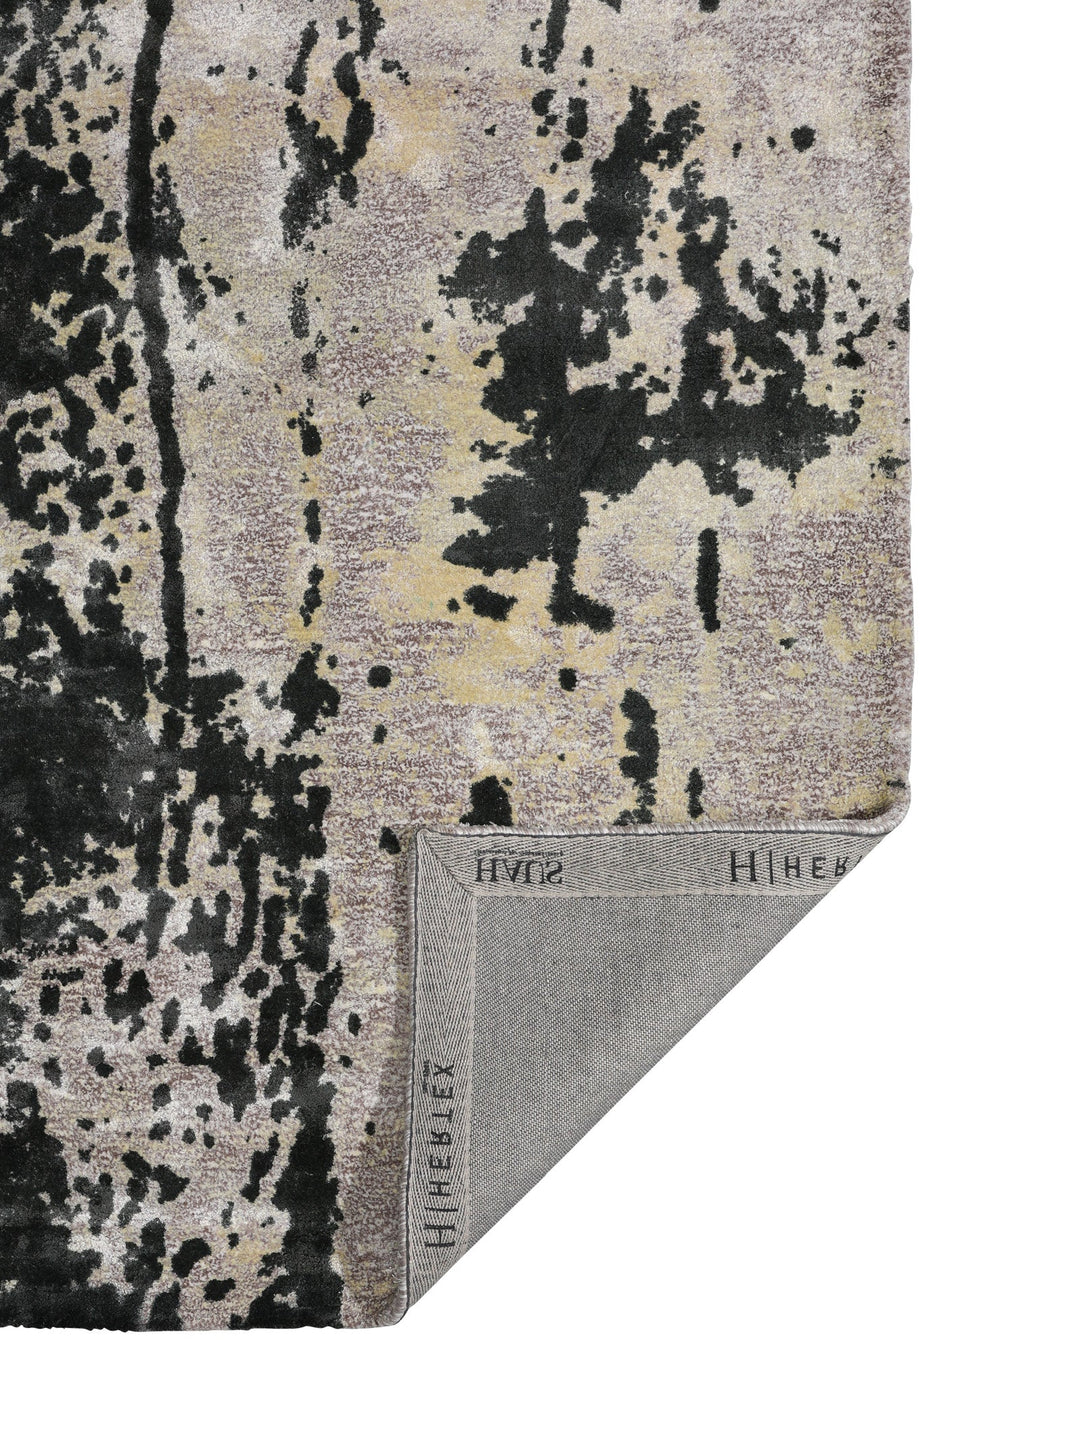 Rainfall Rug in Overclouded - Rugs- Hertex Haus Online - Abstract